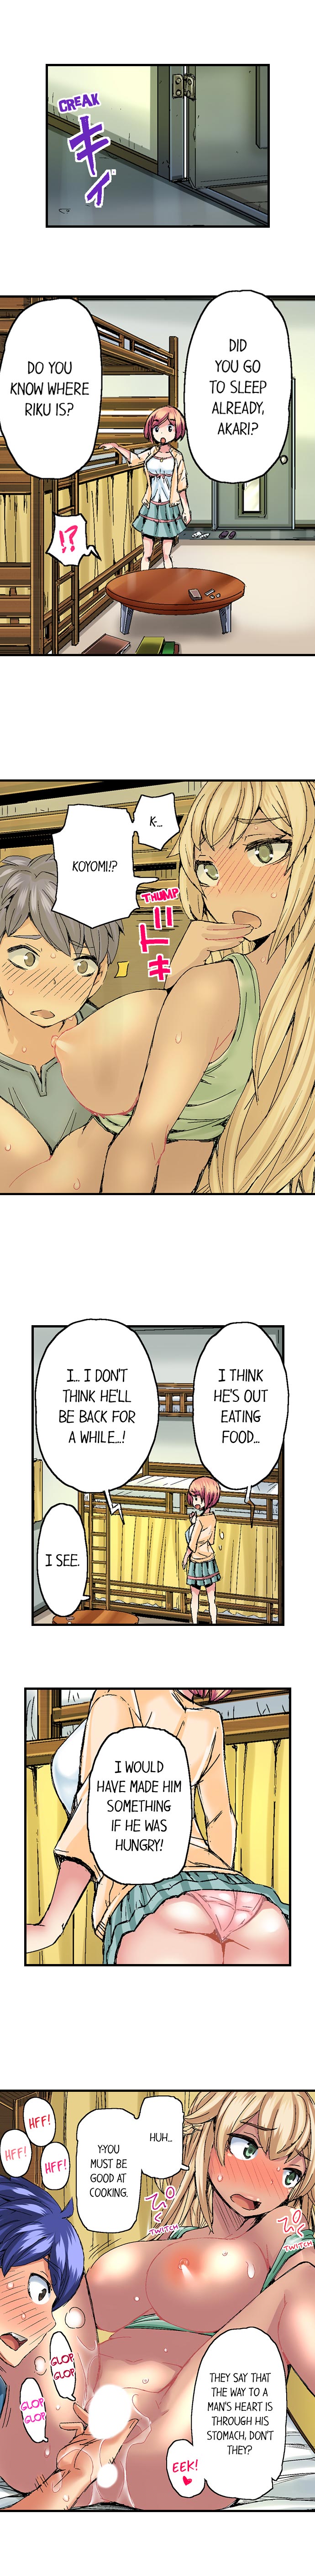 Taking a Hot Tanned Chick’s Virginity - Chapter 20 Page 7